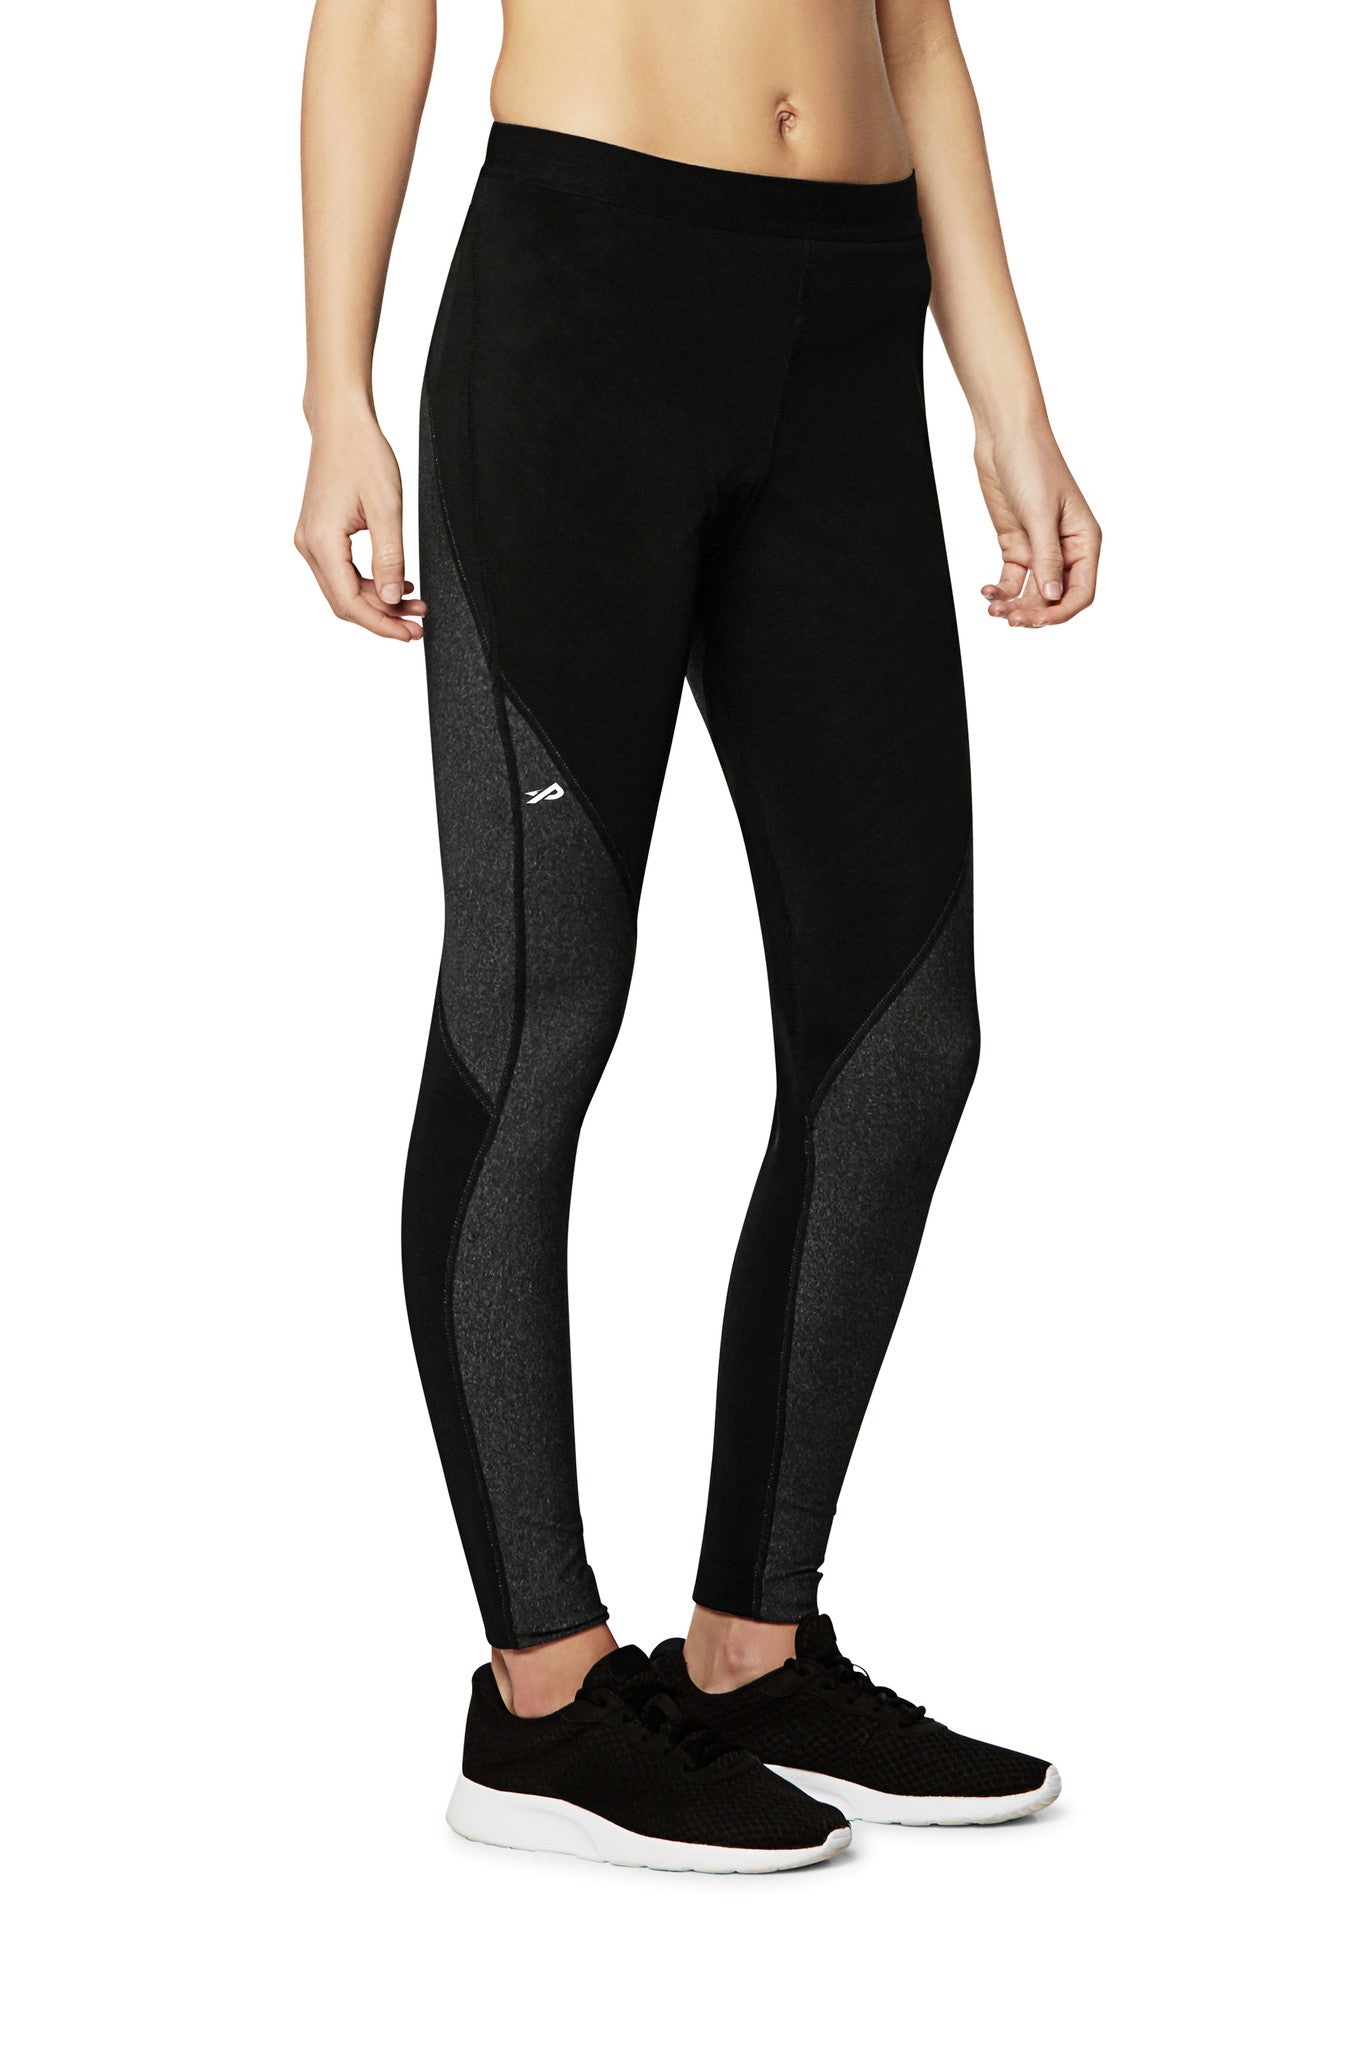 Pro Resistance Tights for Women - Athletic Grey – Physiclo